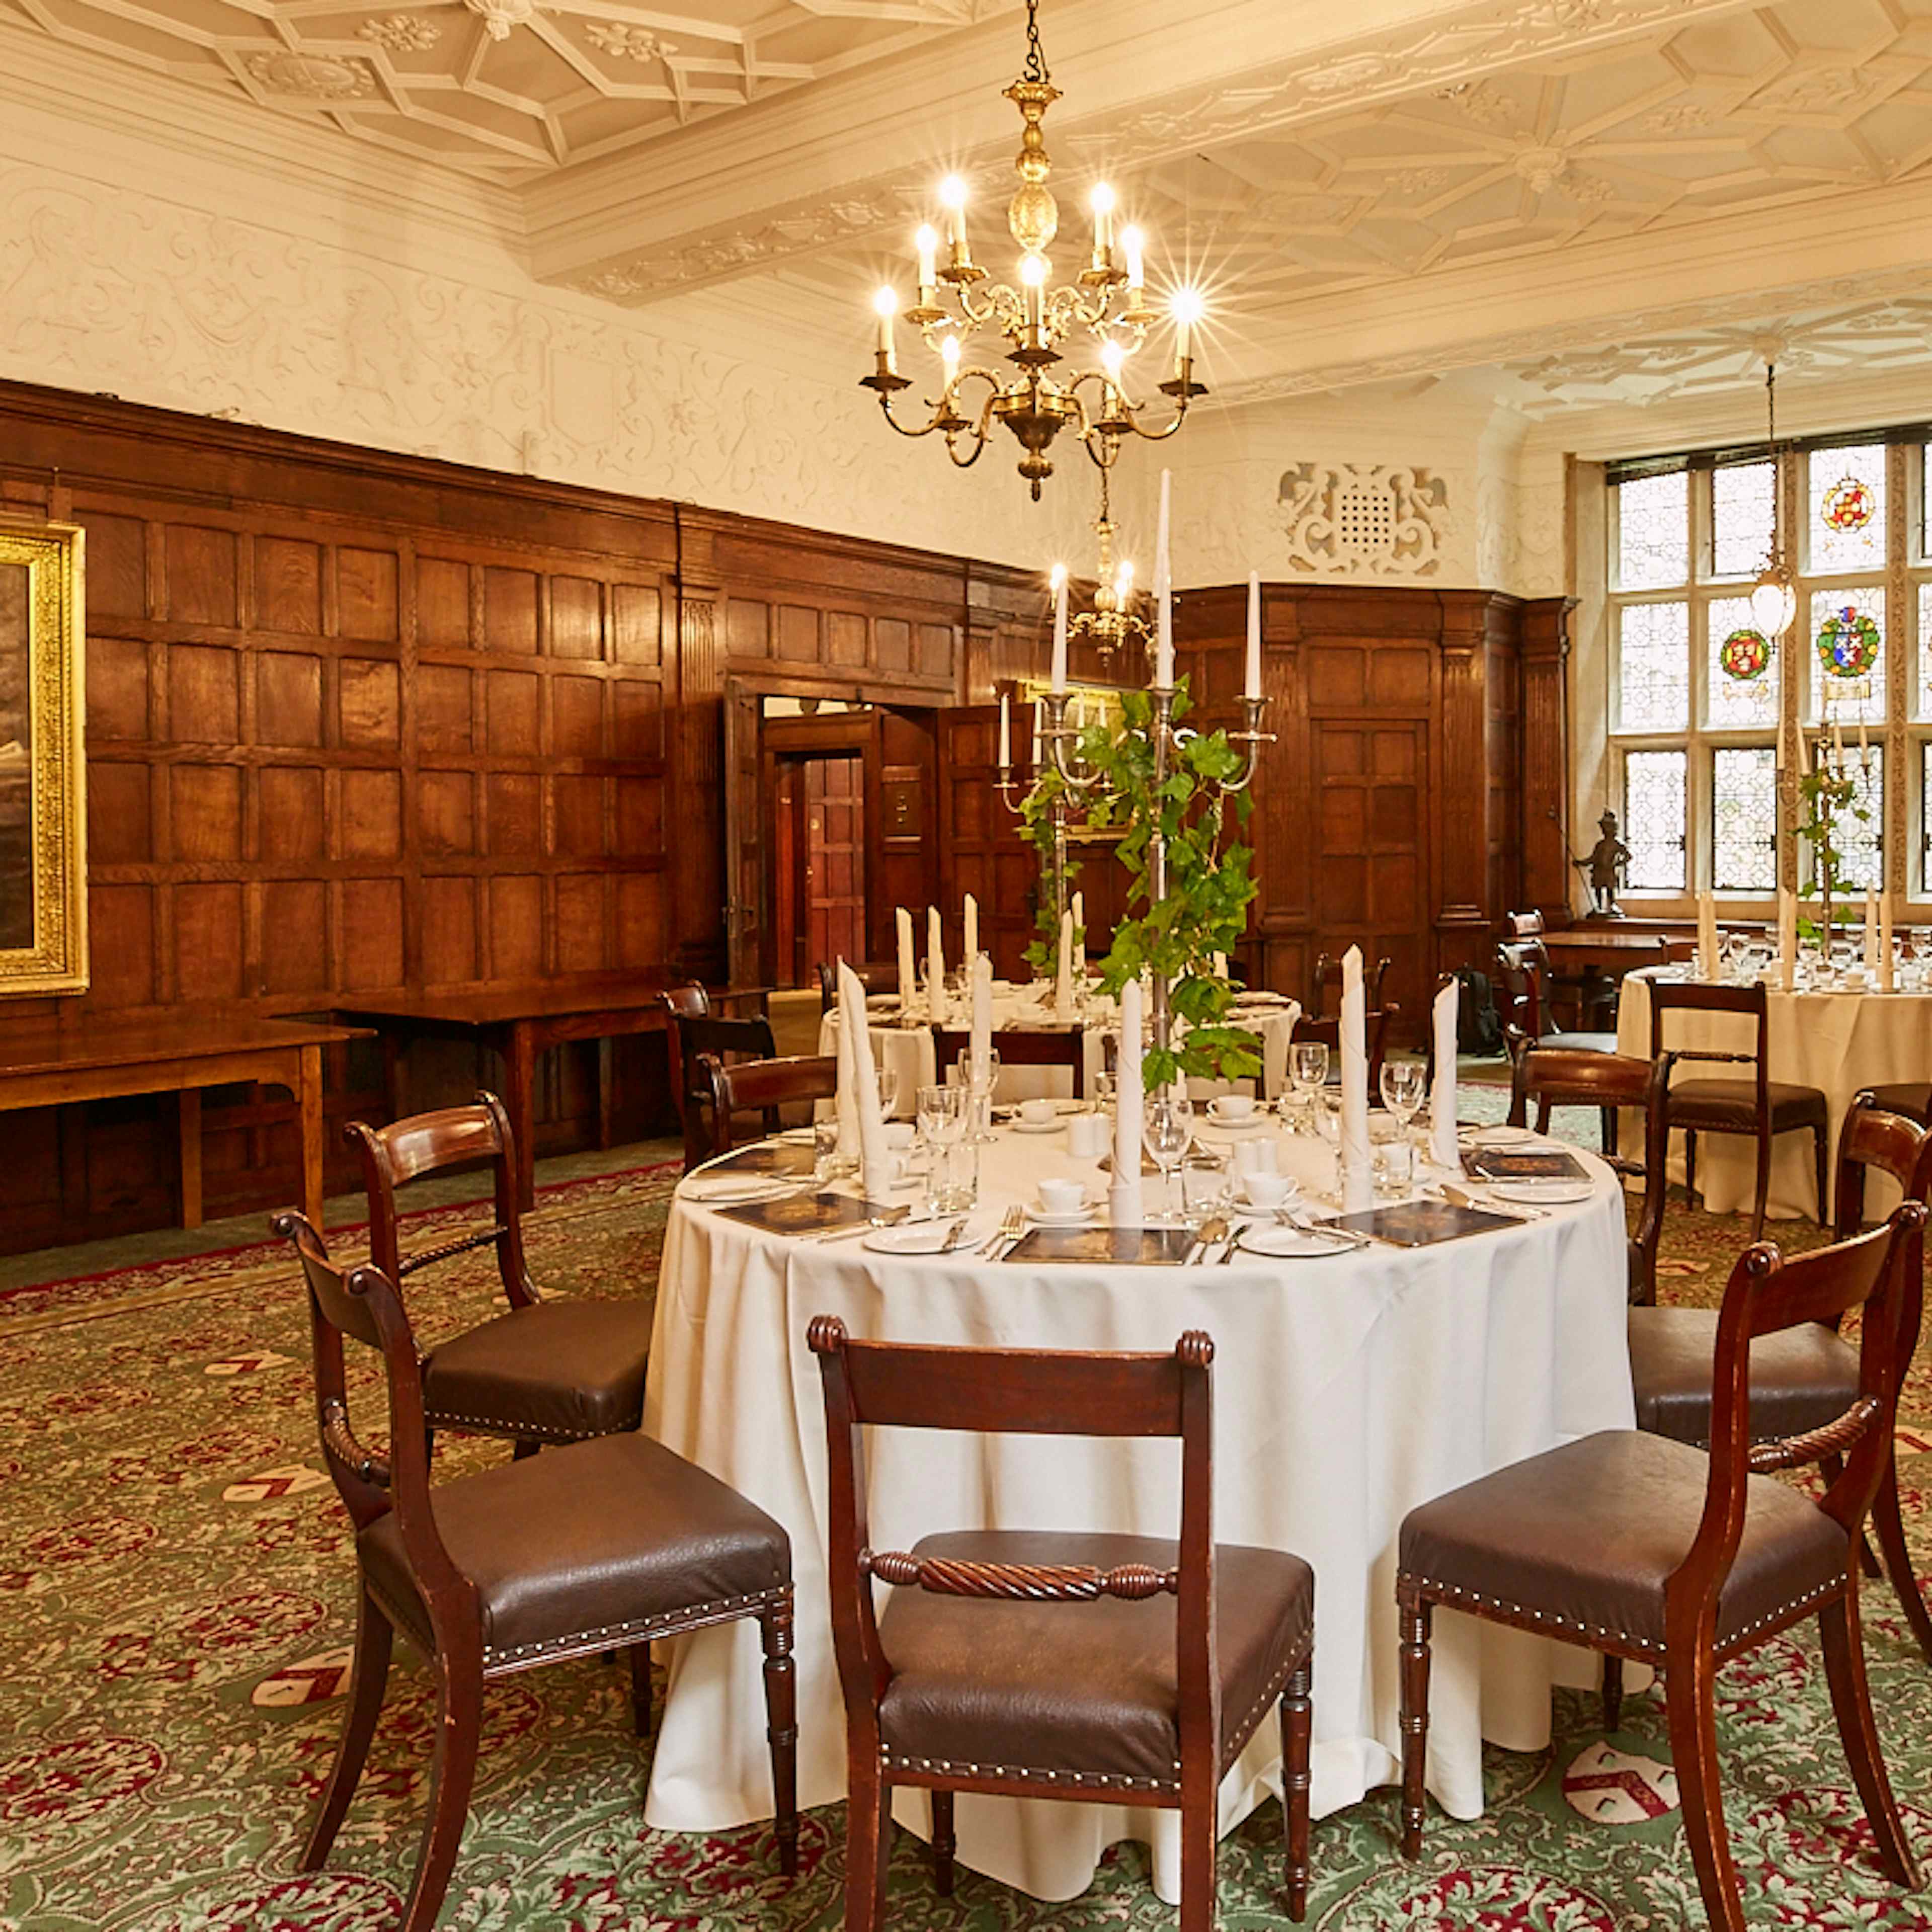 Ironmongers' Hall - The Court Room and The Luncheon Room image 2